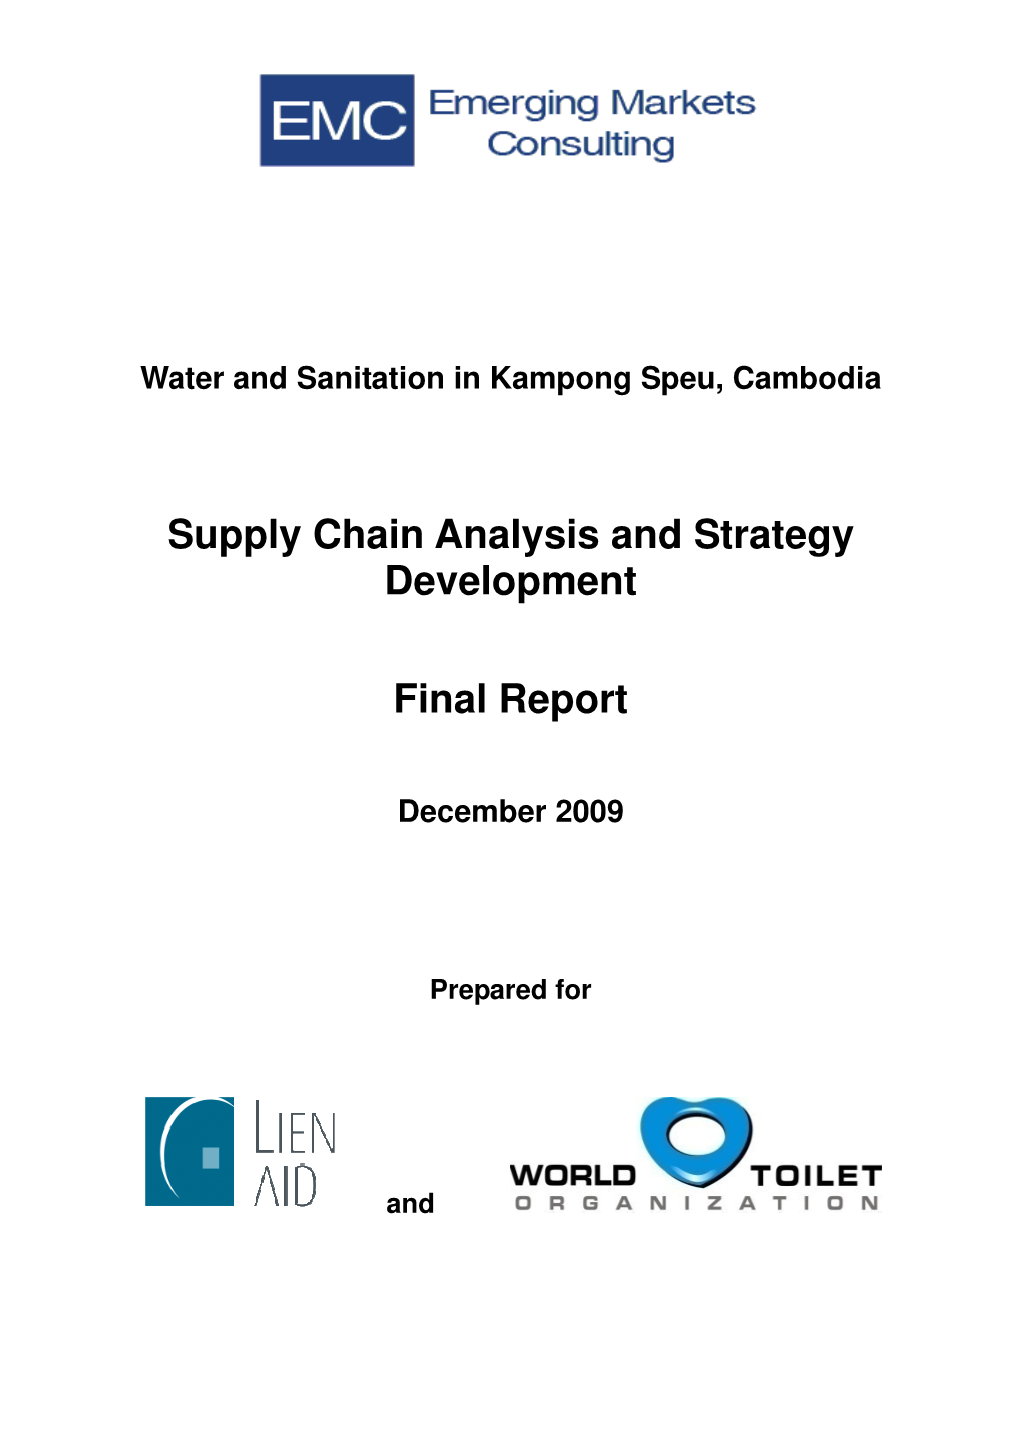 Supply Chain Analysis and Strategy Development Final Report